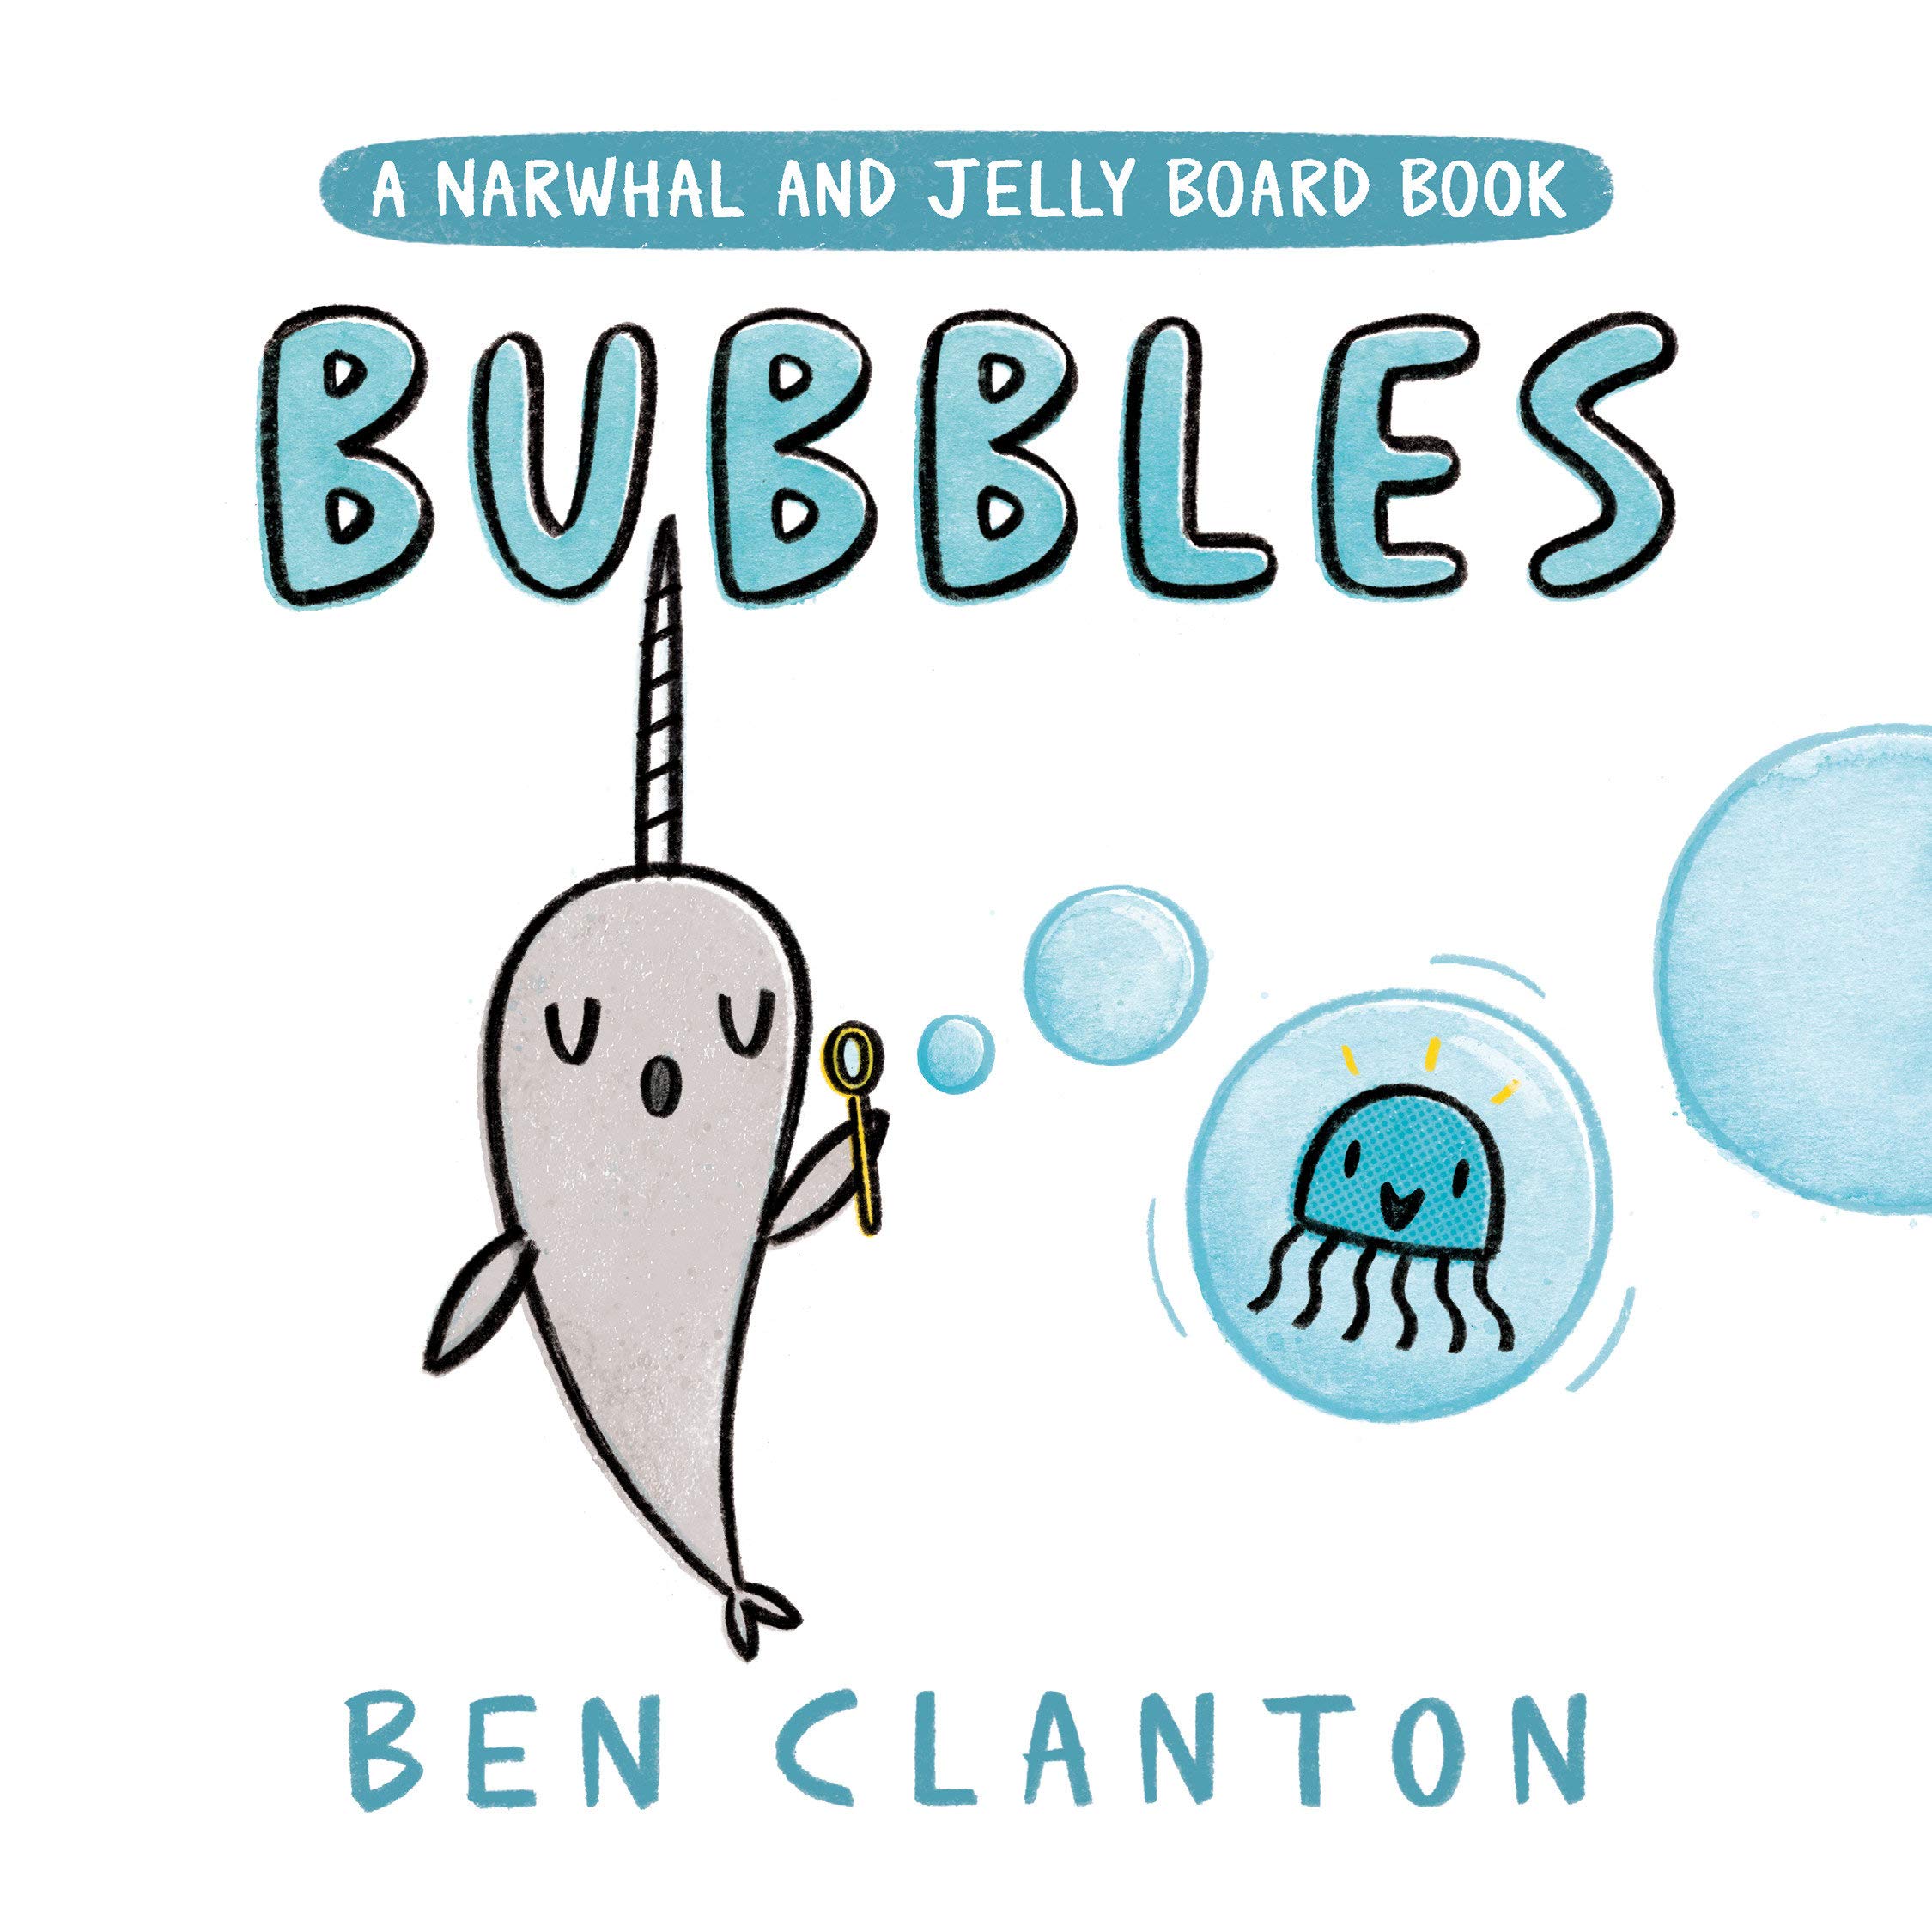 Bubbles (A Narwhal and Jelly Board Book) (A Narwhal and Jelly Book)